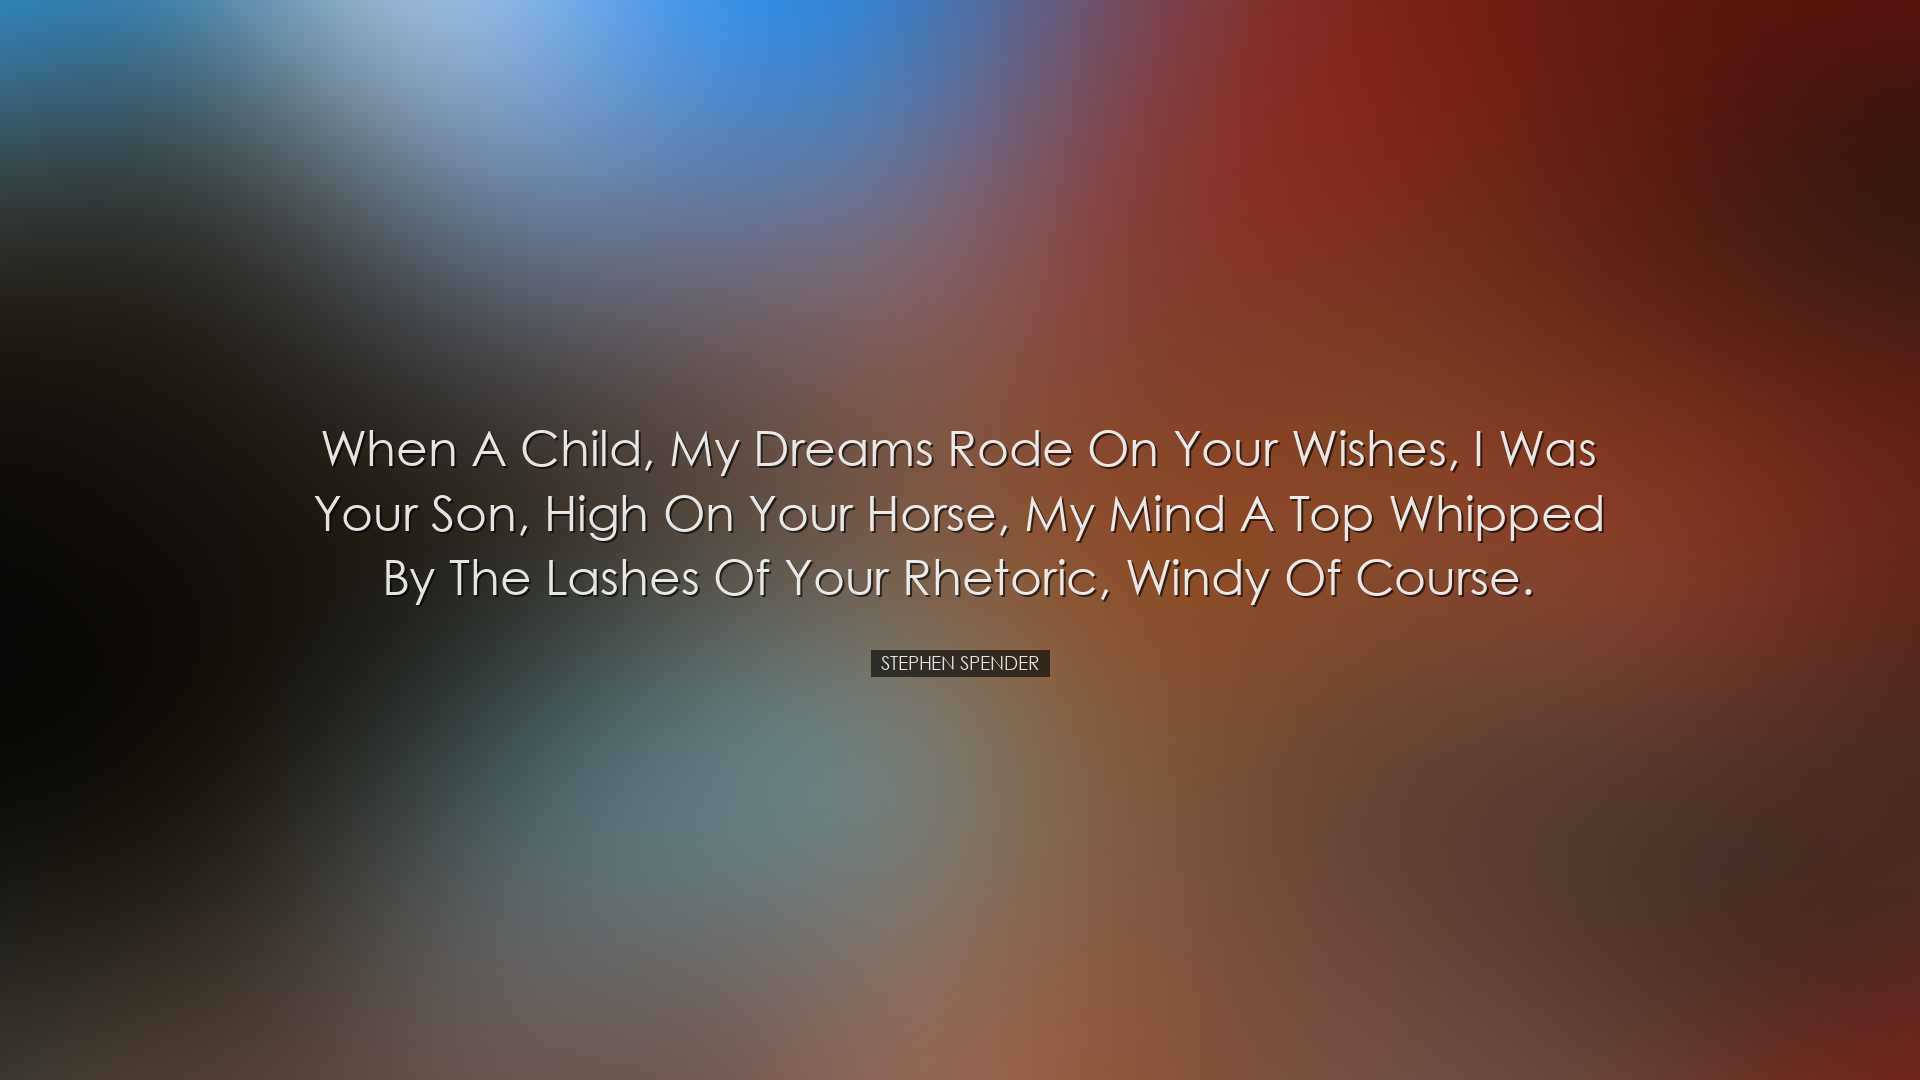 When a child, my dreams rode on your wishes, I was your son, high